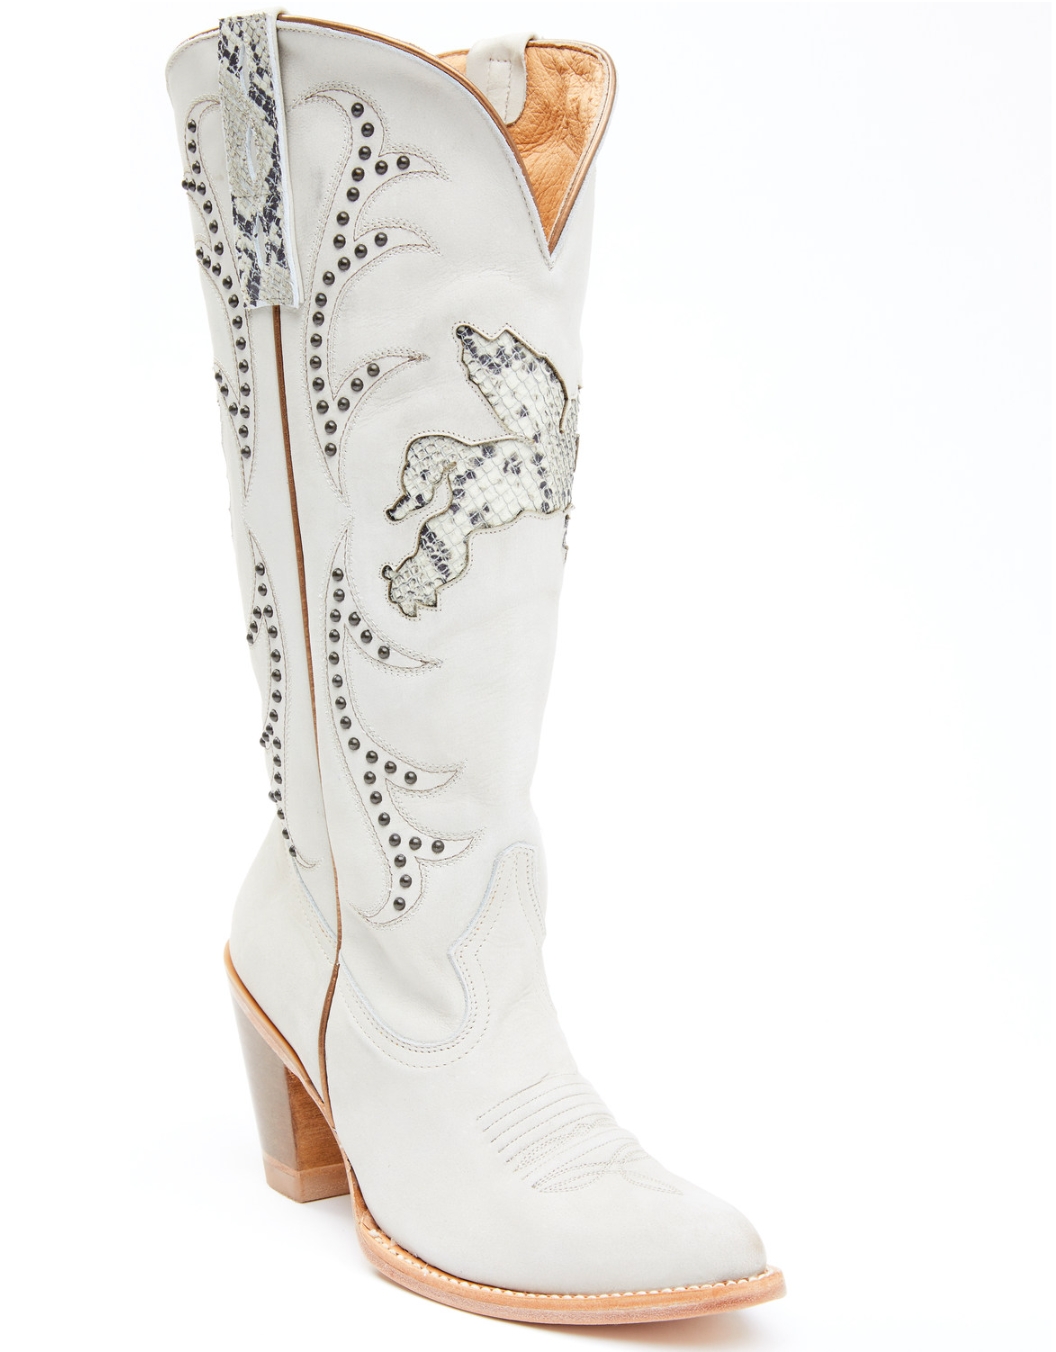 White cowboy boot with silver studs on a white background